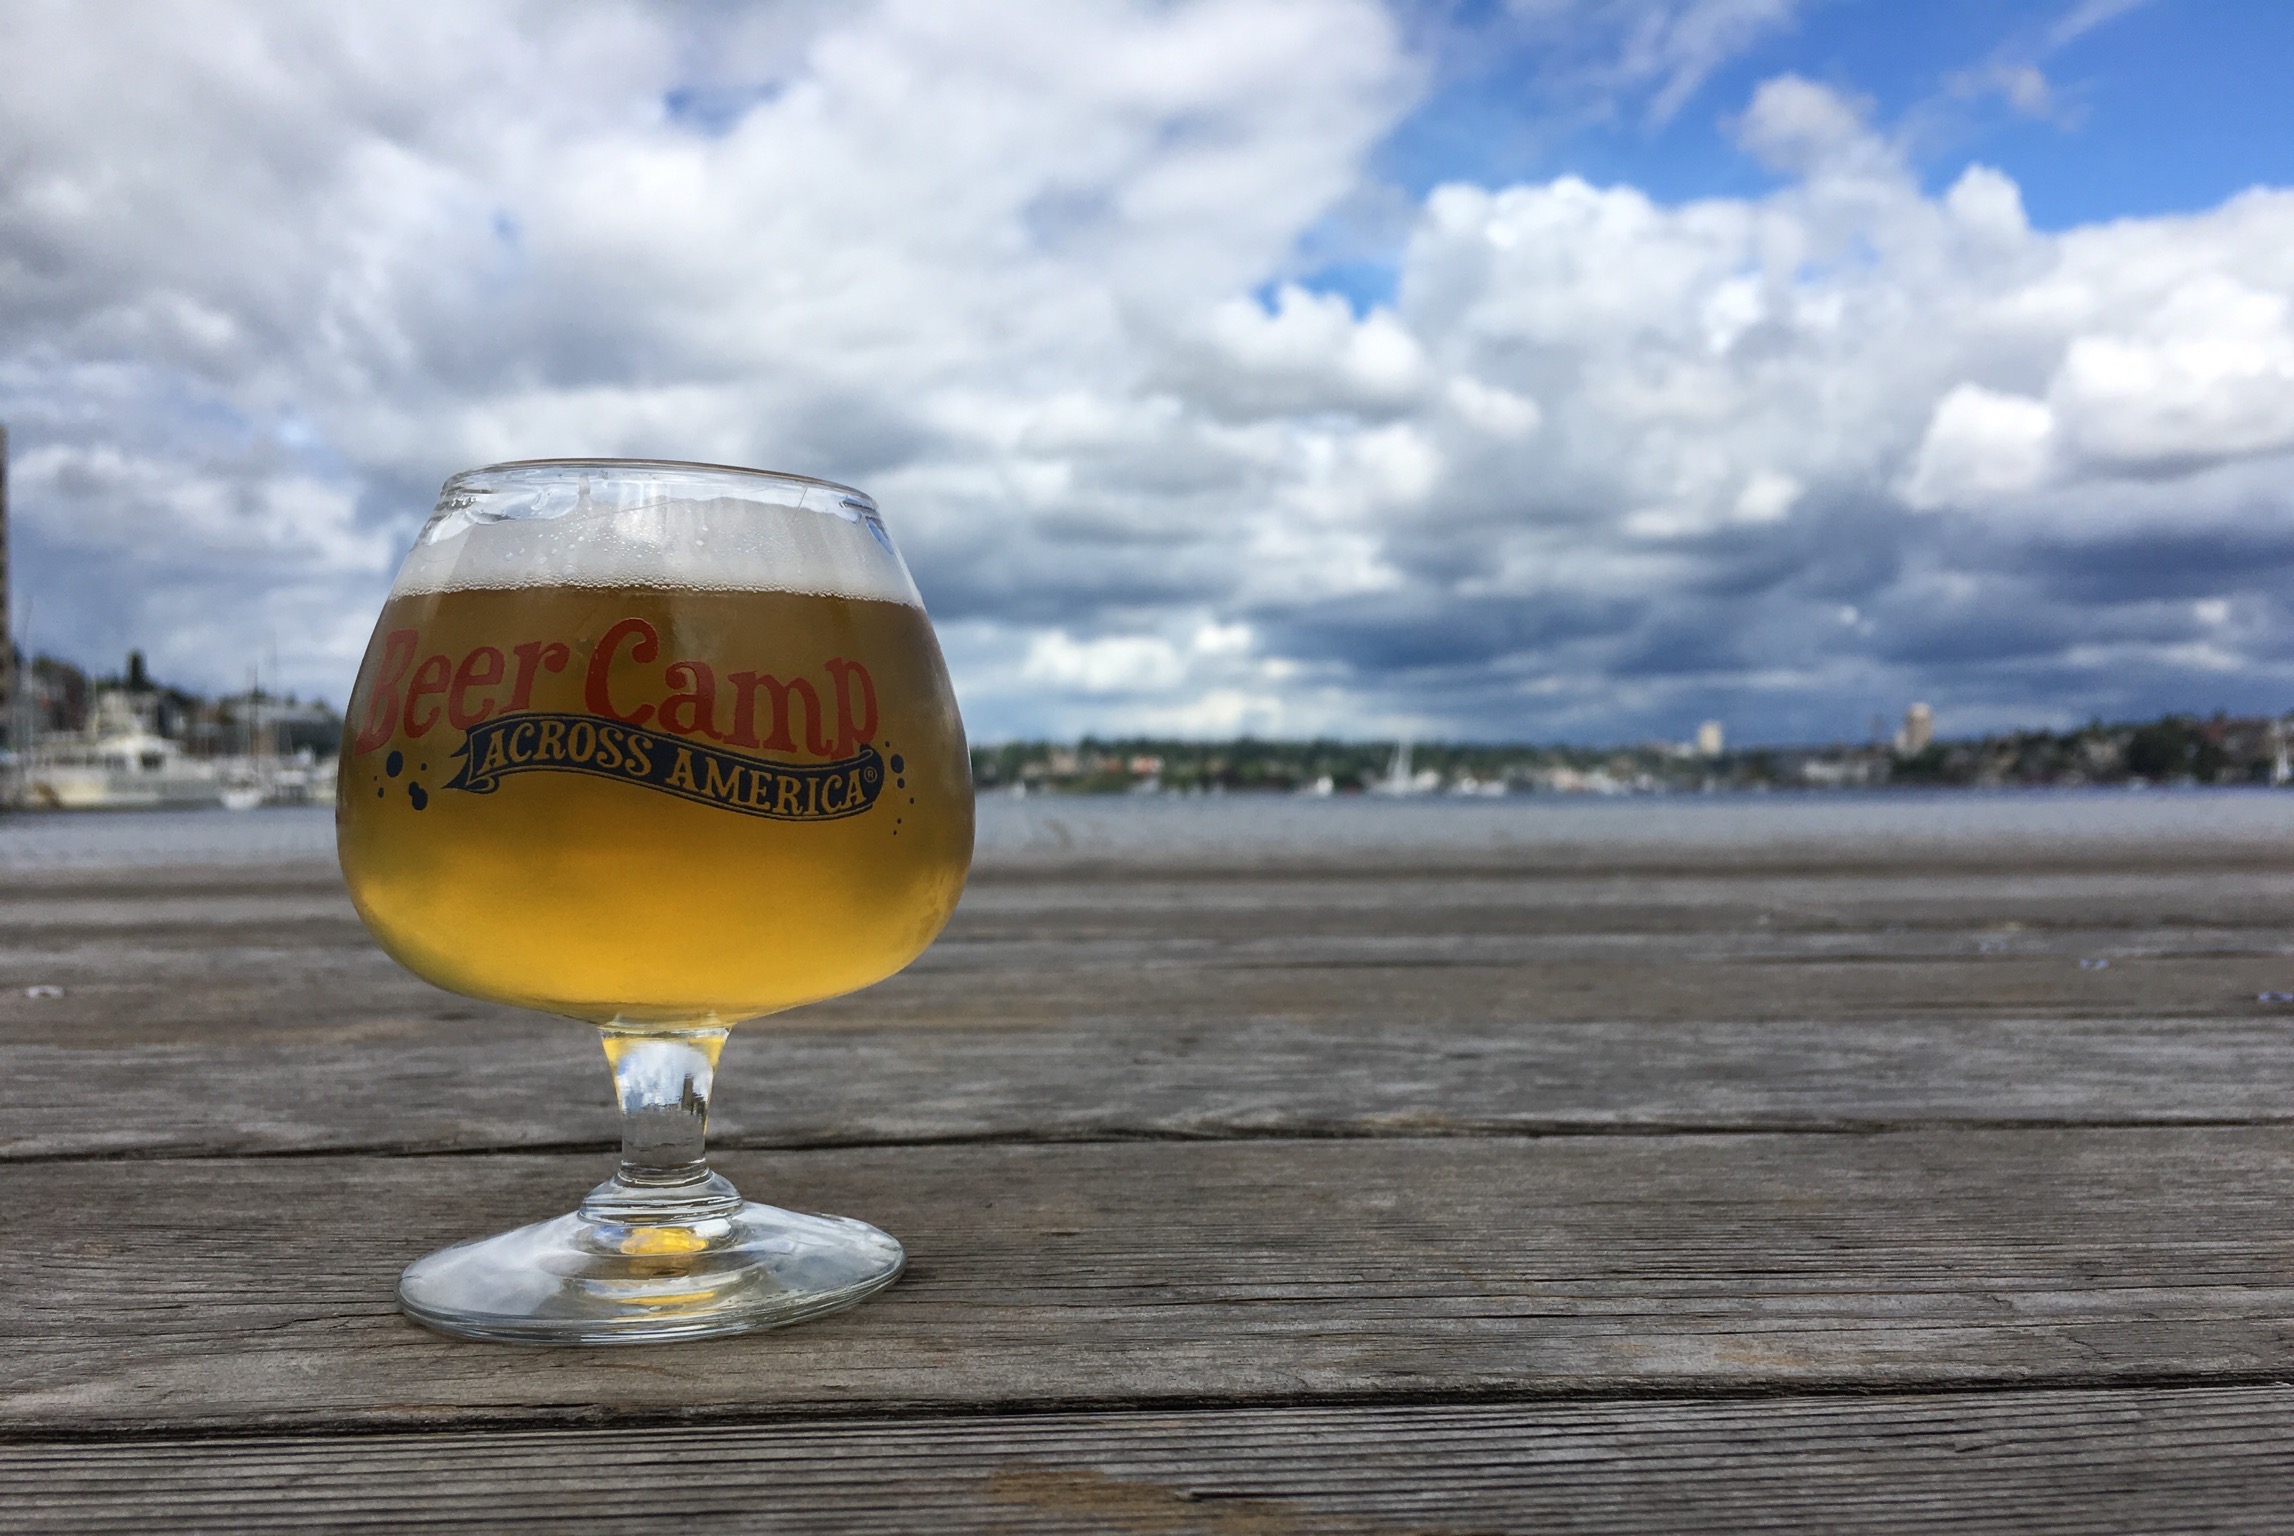 A beer on the dock of Lake Union at Sierra Nevada Beer Camp Across America Festival in Seattle. (photo by Cat Stelzer)